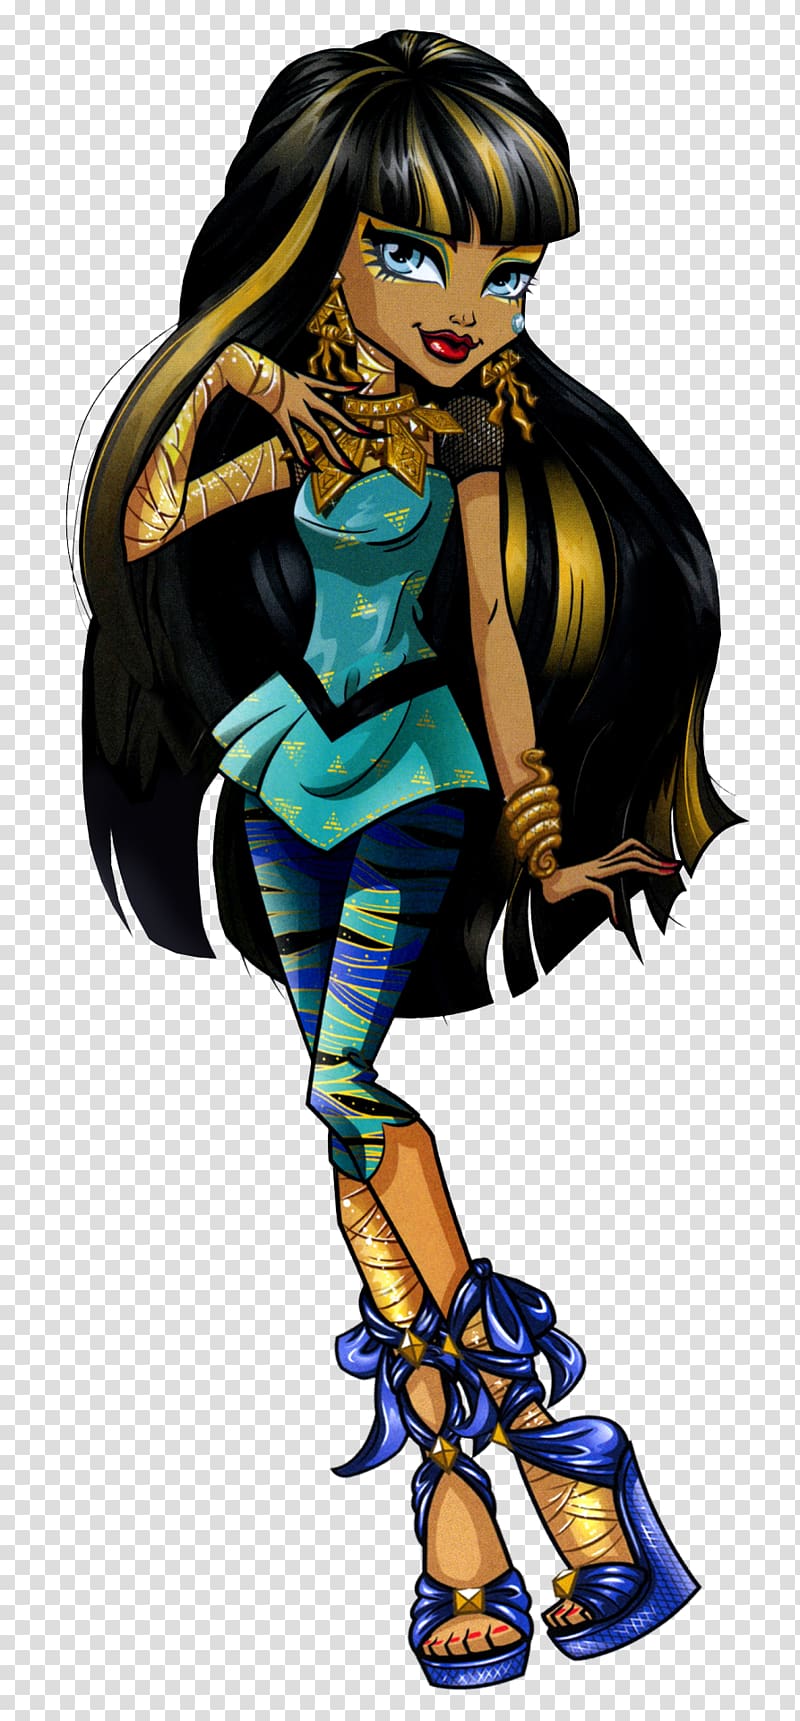 Cleo DeNile Monster High Cleo De Nile Clawdeen Wolf Frankie Stein, doll transparent background PNG clipart